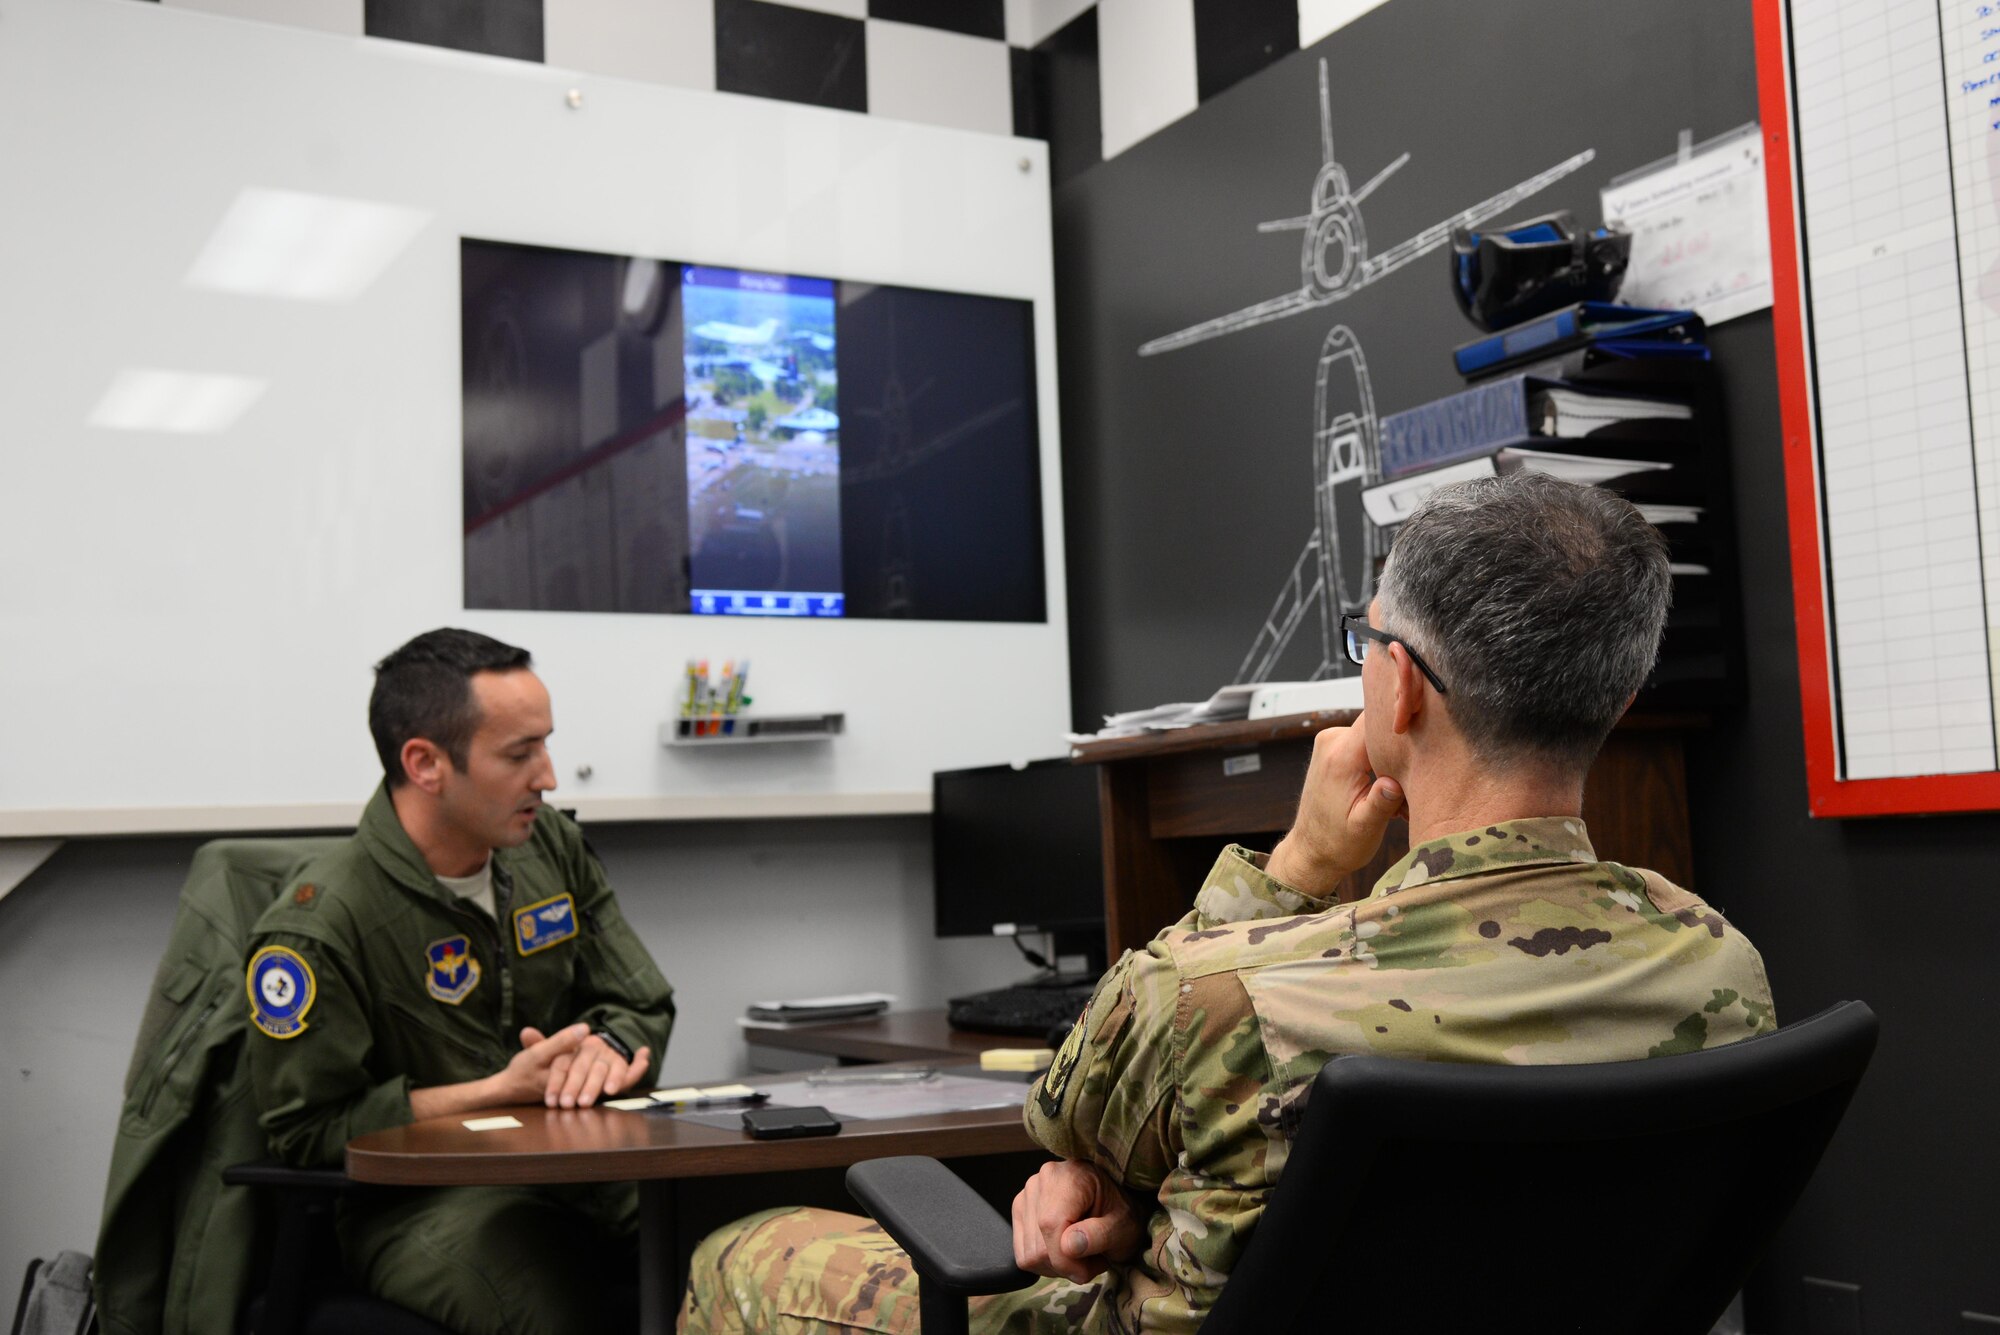 Maj. Gen. Craig Wills, 19th Air Force commander, is briefed about the Columbus Air Force Base mobile app by Maj. Tory Lodmell, 14th Flying Training Wing Commander’s Action Group director, Oct. 1, 2019, on Columbus Air Force Base, Miss. The app was designed for members of team BLAZE to have pertinent information about the base including a directory, map, activities and pop up notifications. (U.S. Air Force photo by Airman 1st Class Jake Jacobsen)